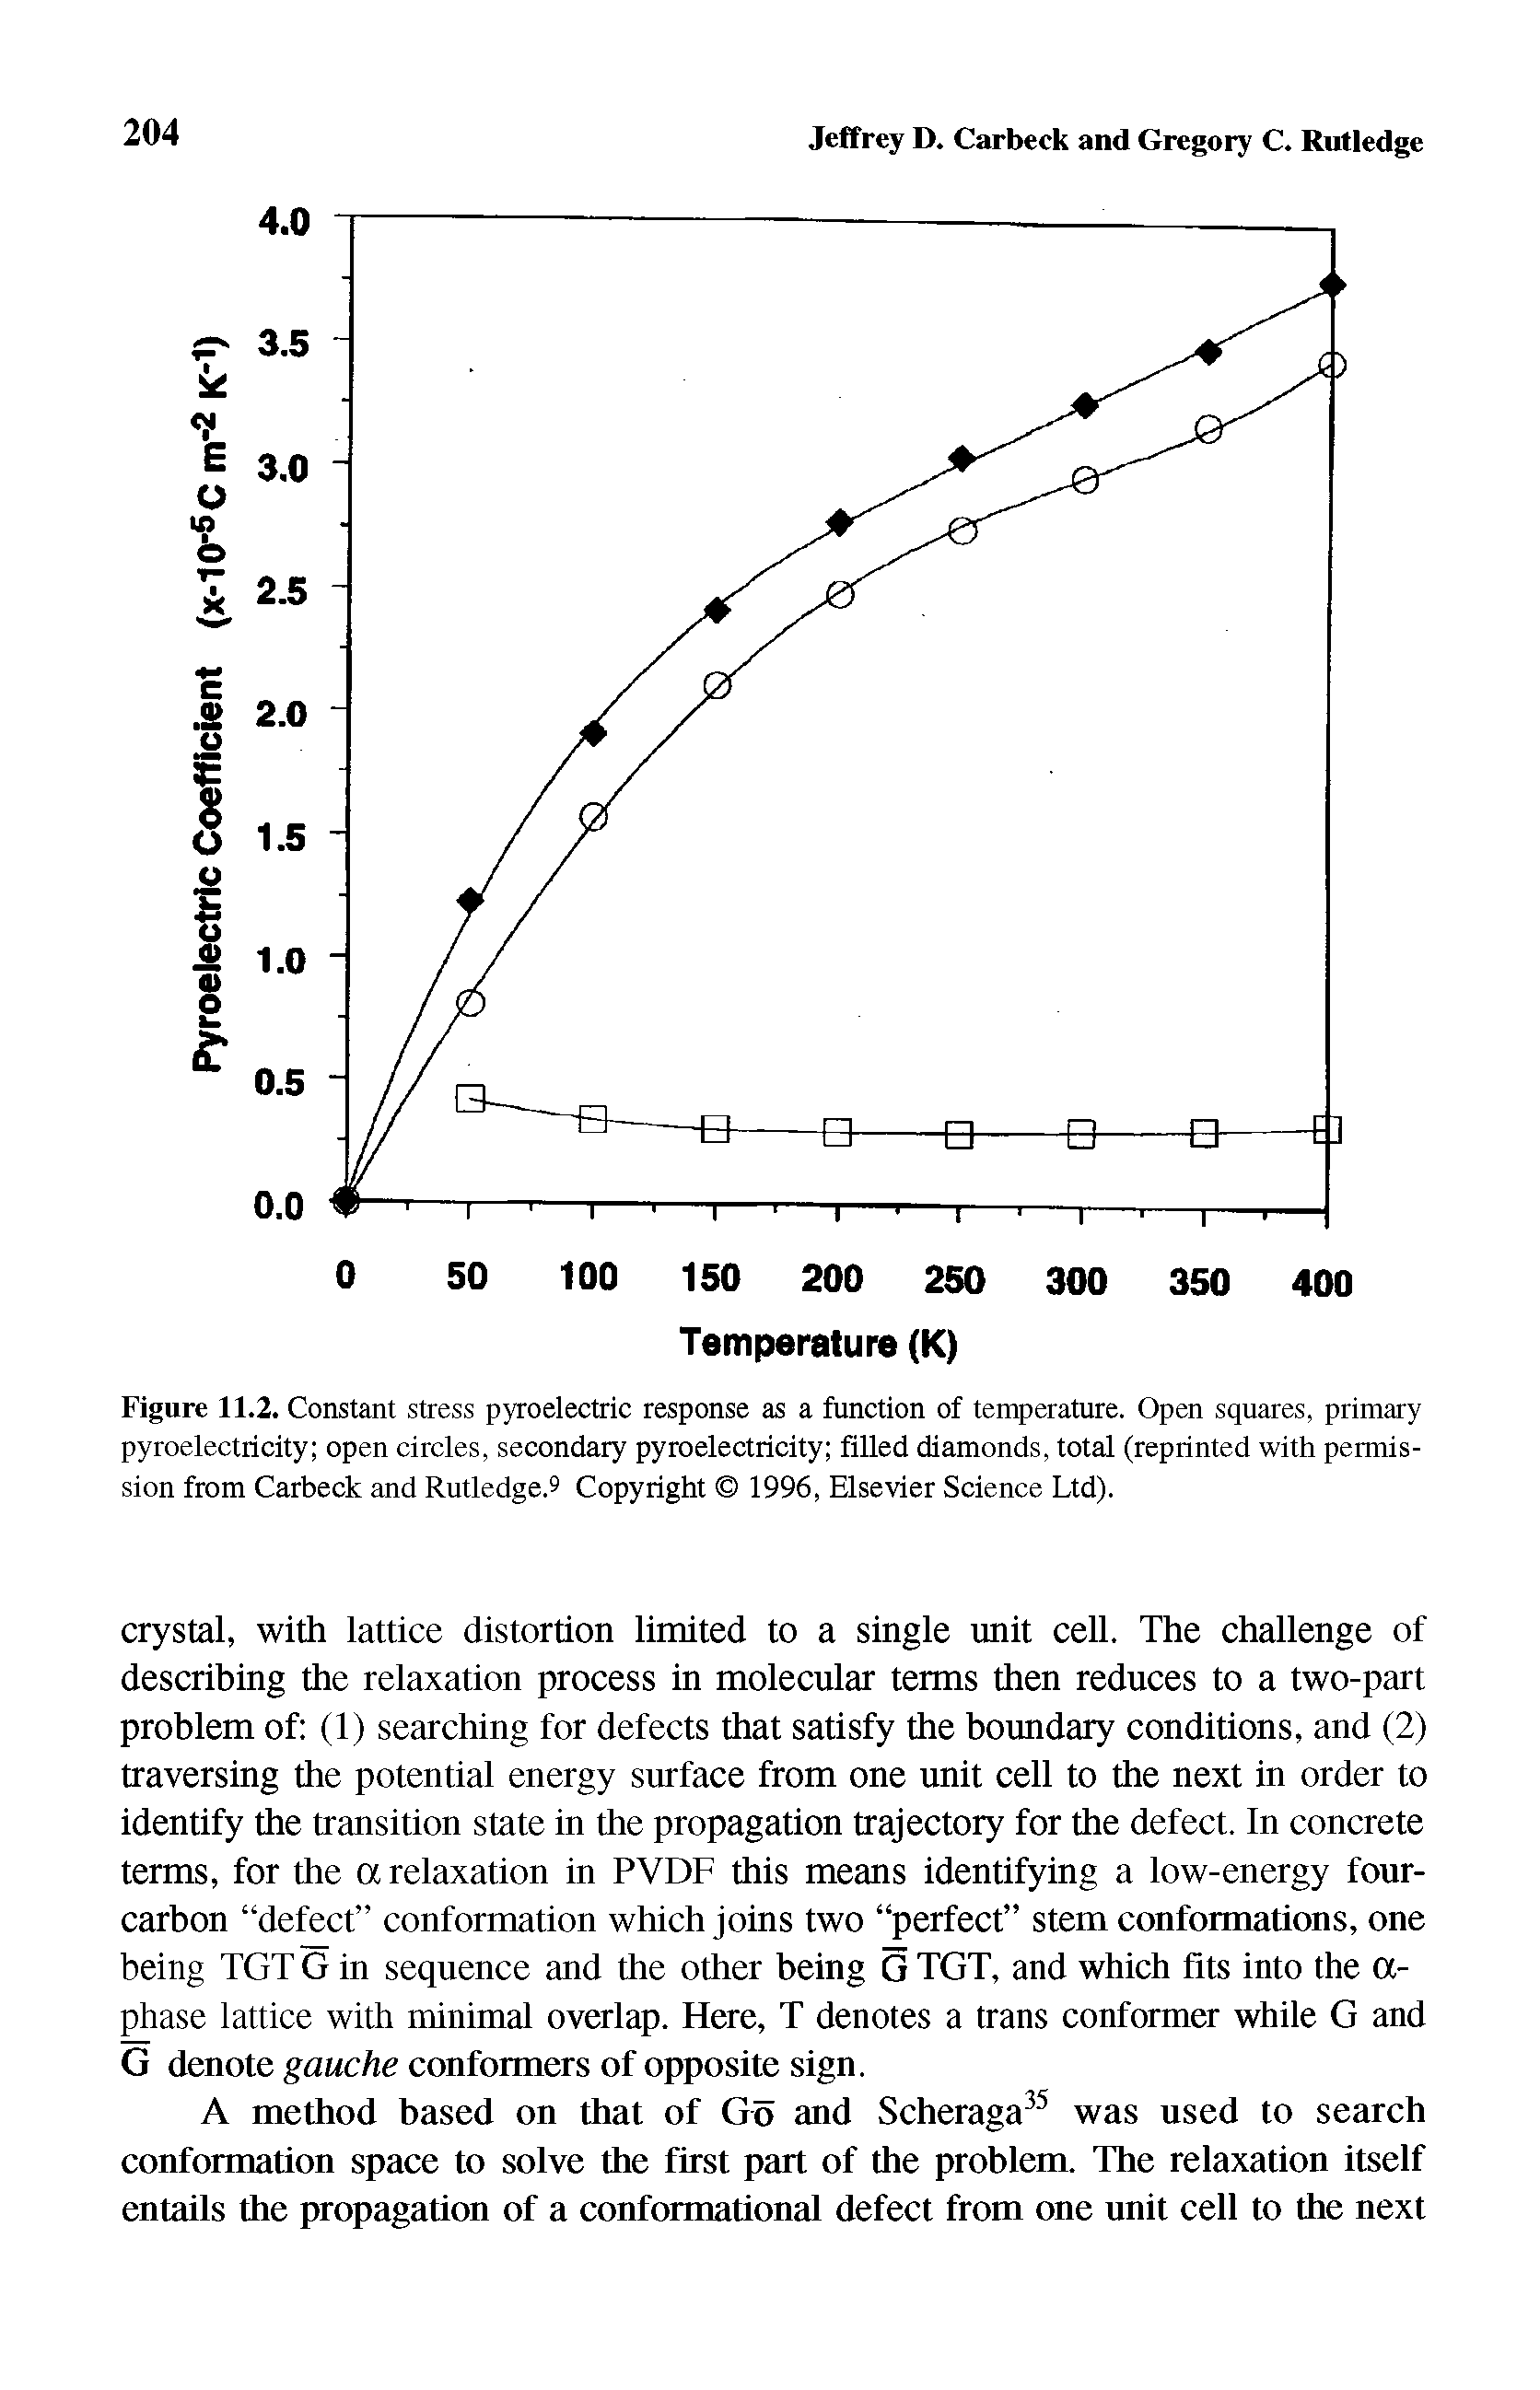 Figure 11.2. Constant stress pyroelectric response as a function of temperature. Open squares, primary pyroelectricity open circles, secondary pyroelectricity filled diamonds, total (reprinted with permission from Carbeek and Rutledge. Copyright 1996, Elsevier Science Ltd).